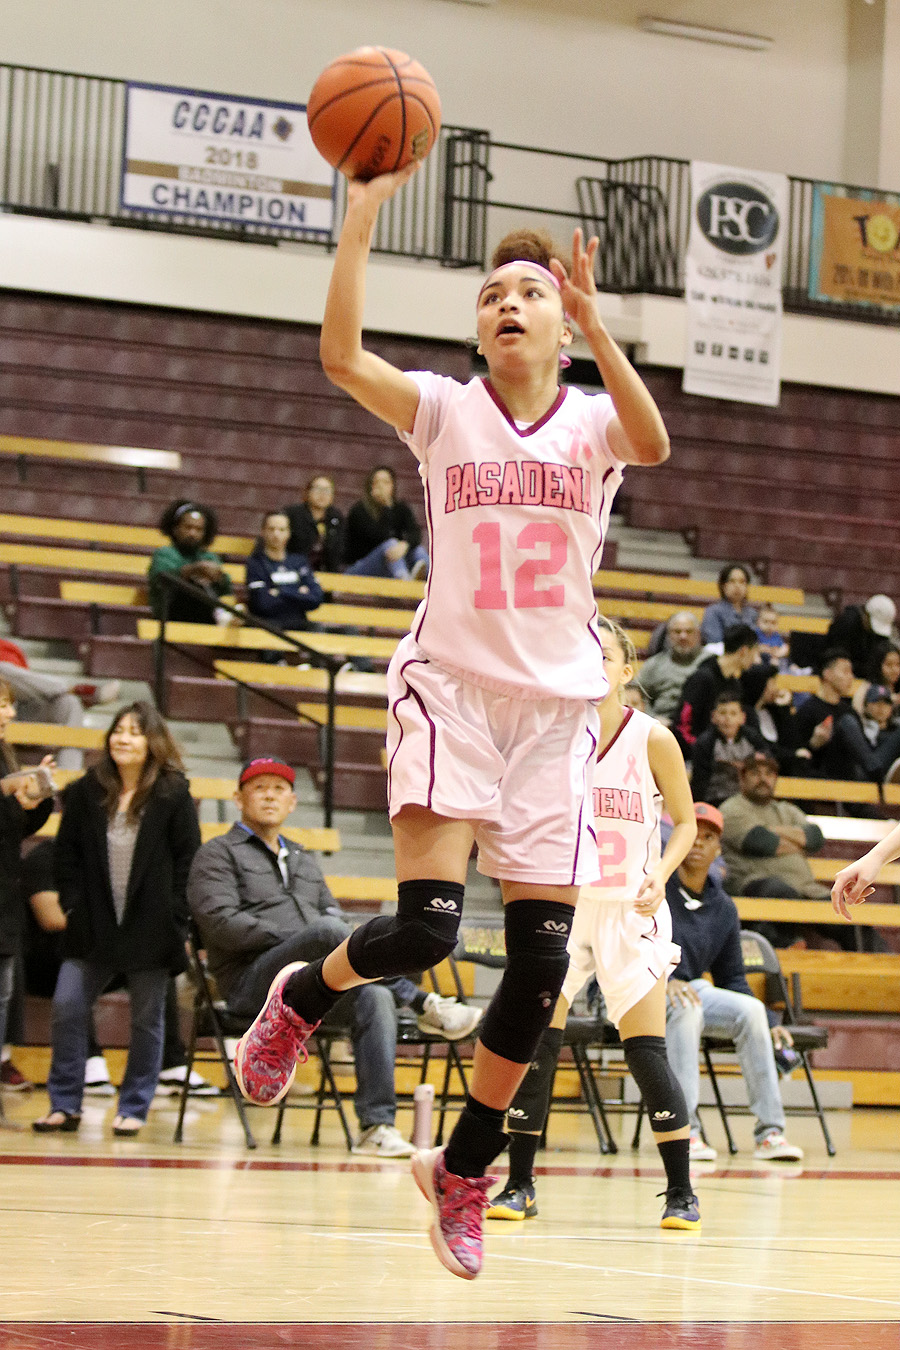 Daniela Mendez goes up for a layup in a recent Lancers game.